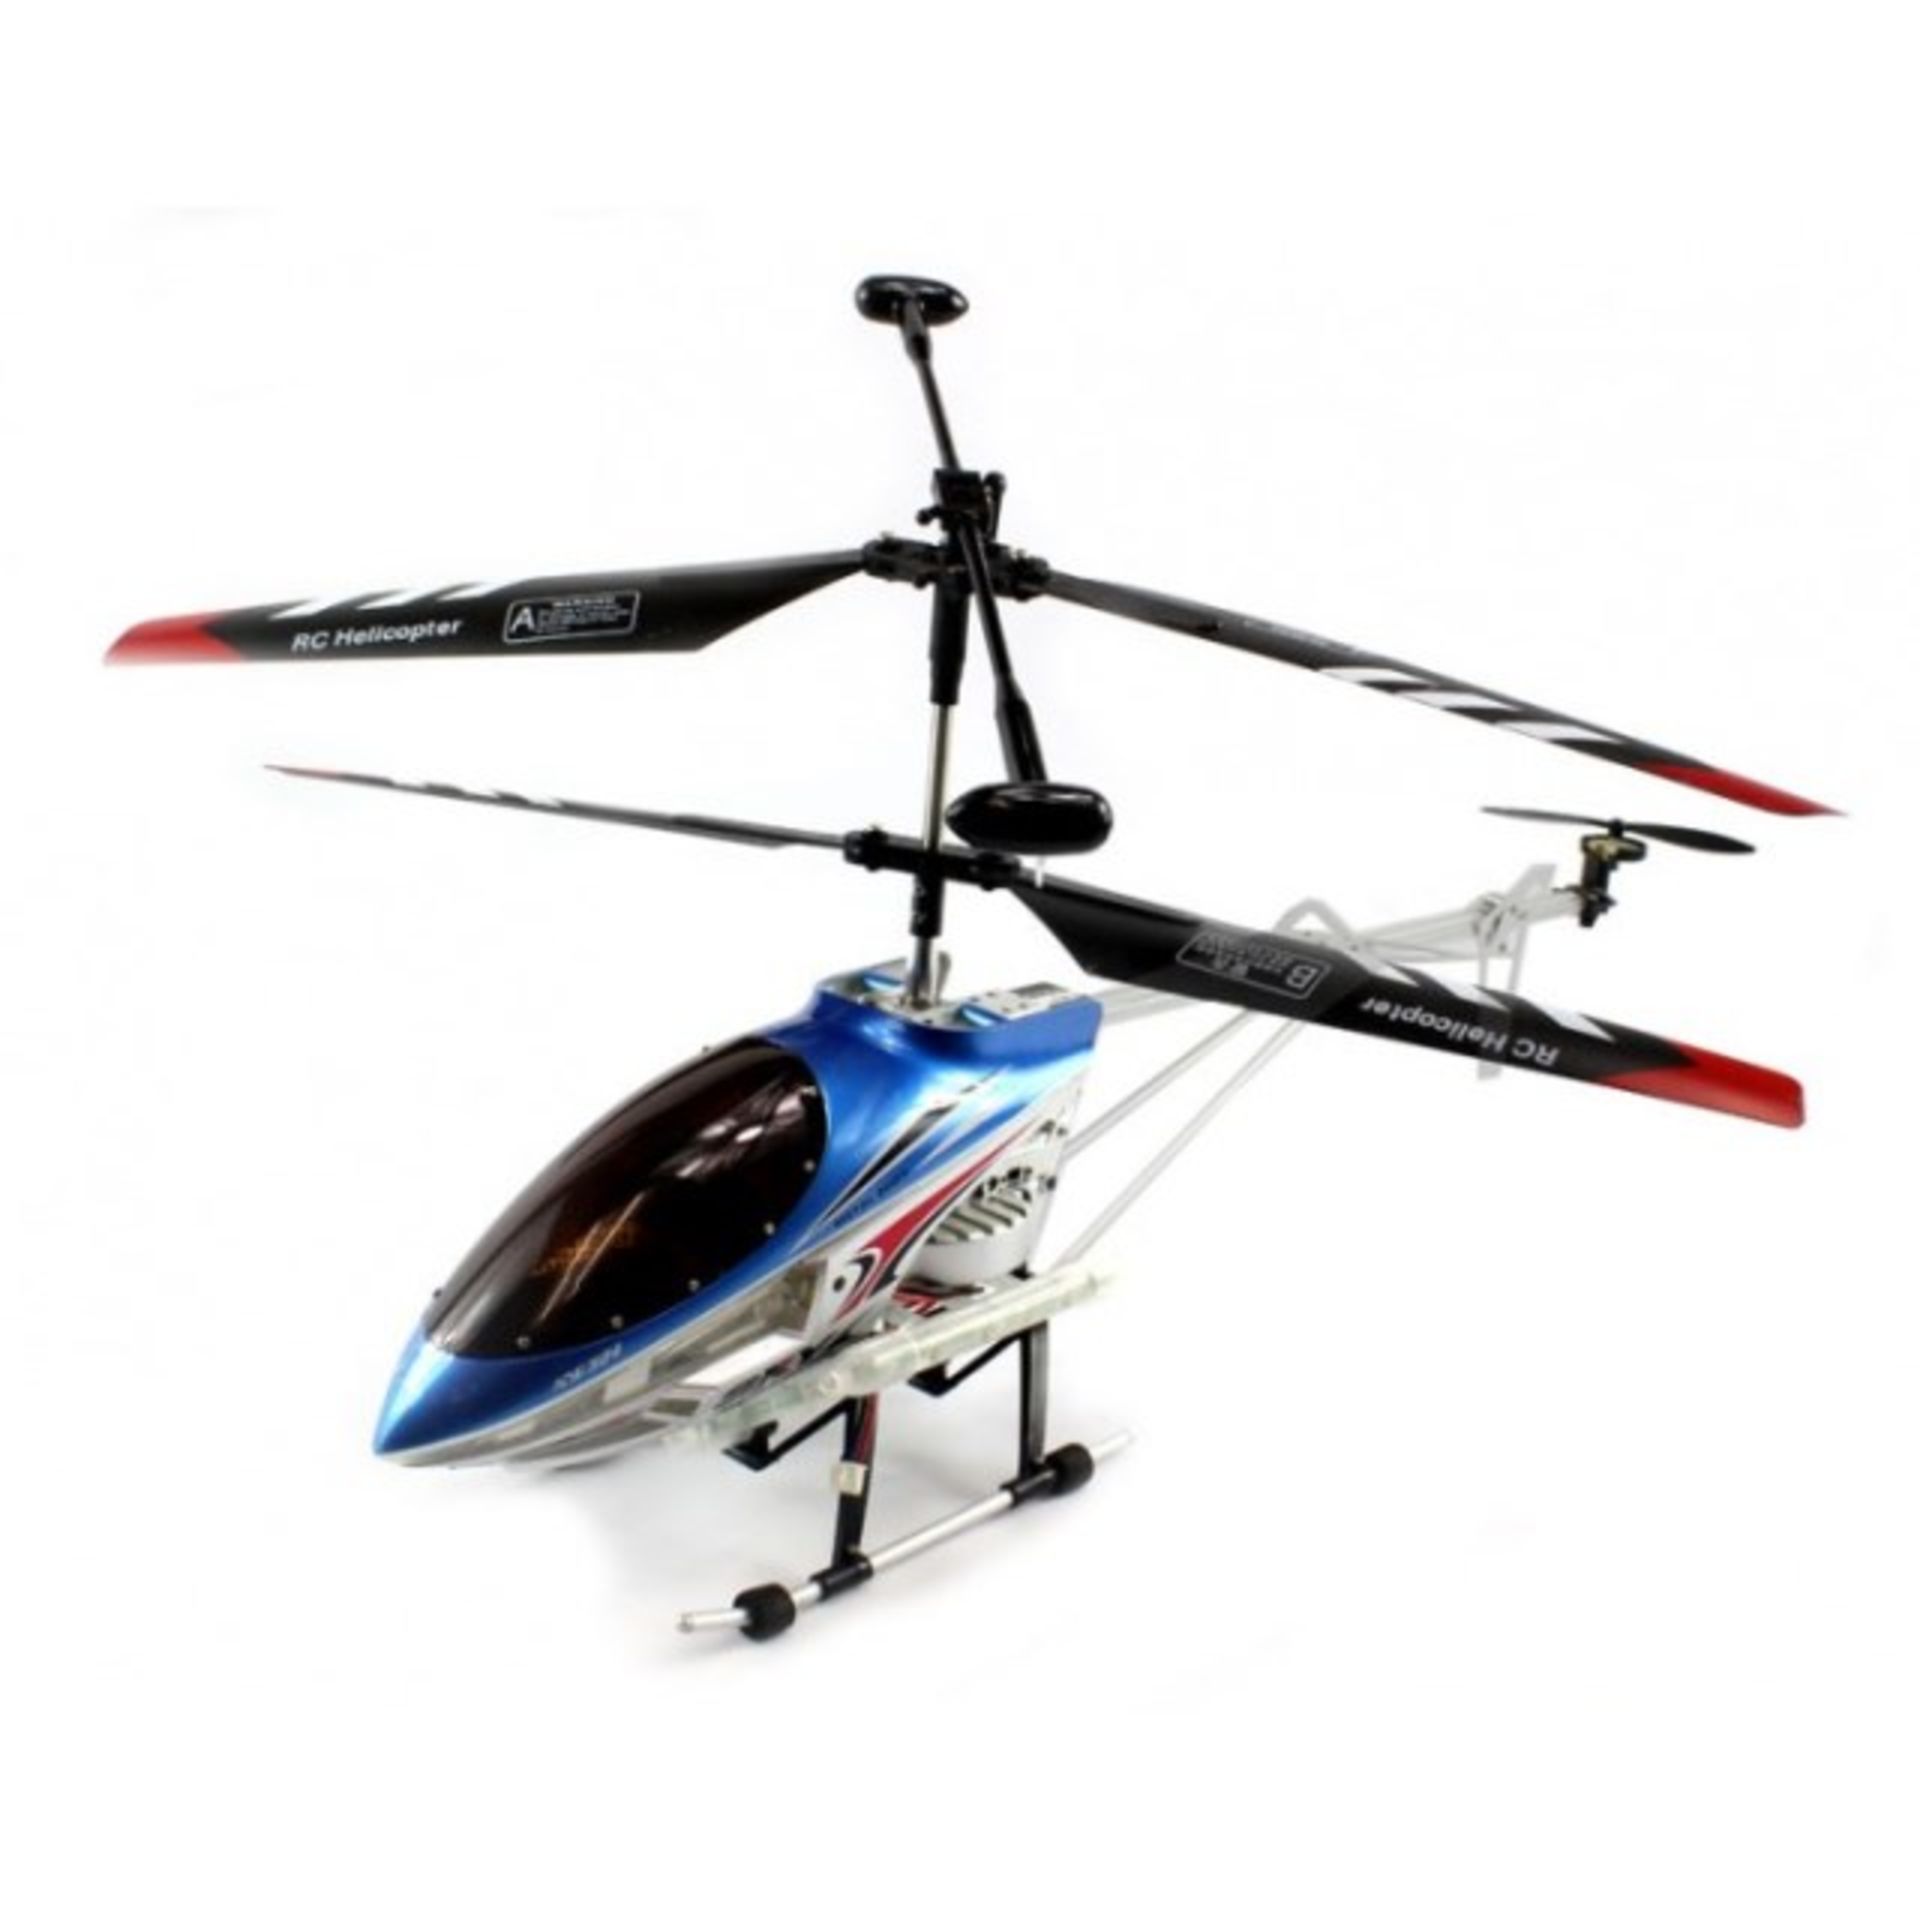 V Brand New Large Radio Conrol Sky Lanneret Helicopter With Built In Gyro 3.5 Channel With Spare